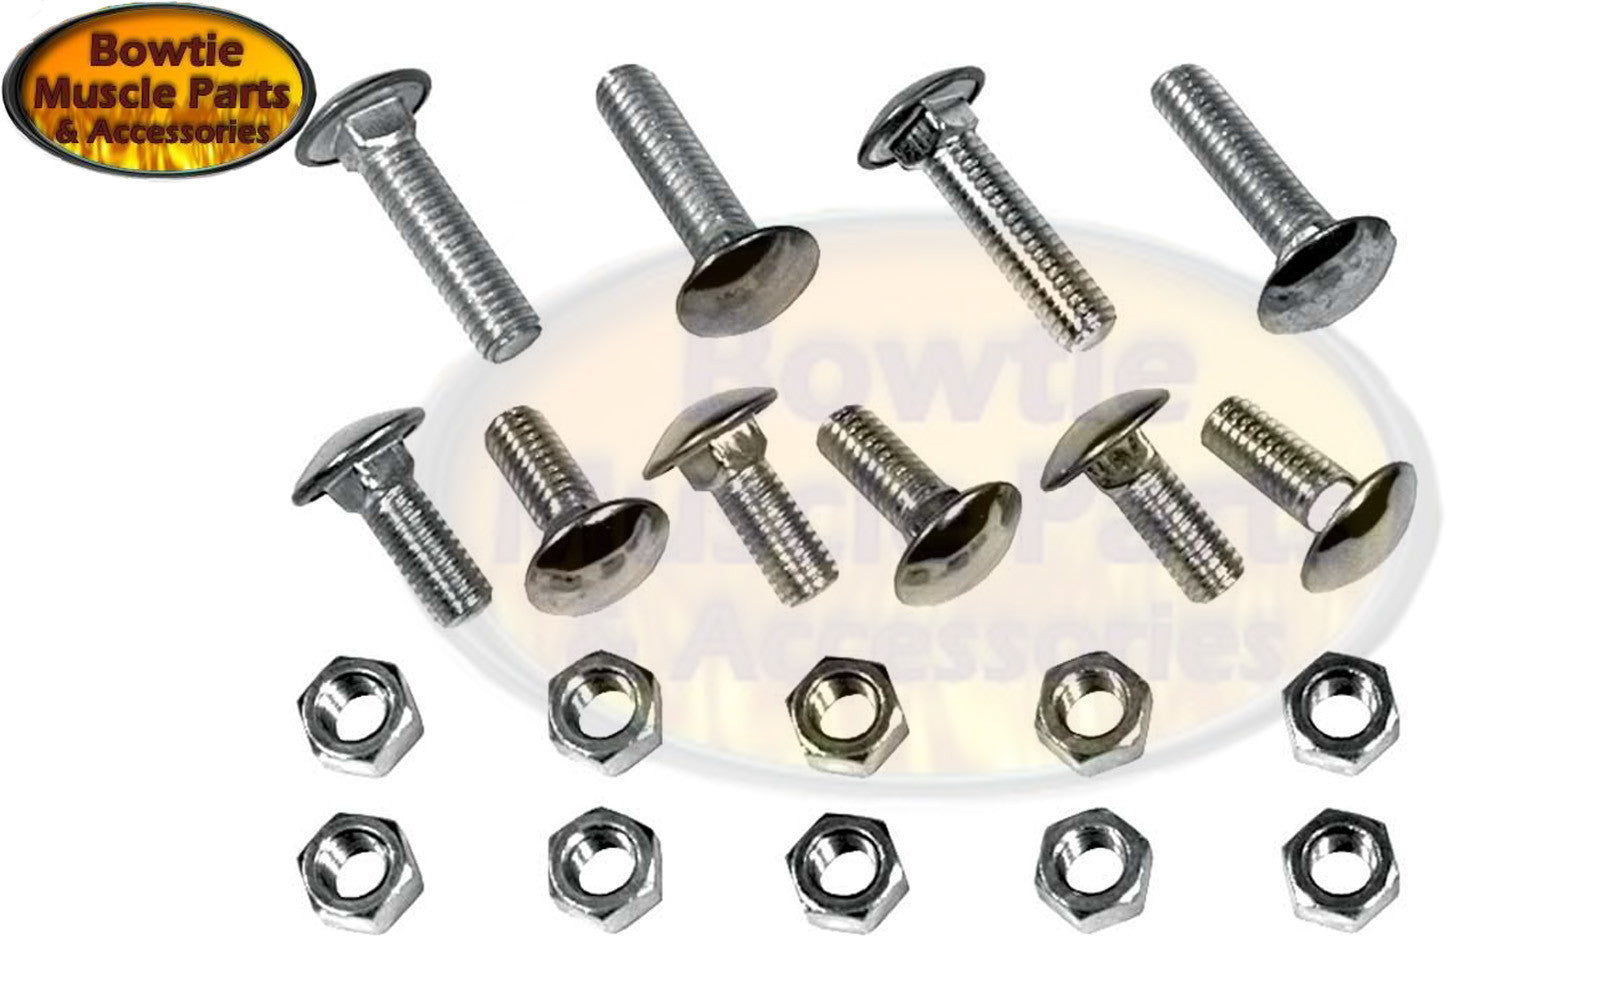 68 69 CAMARO BUMPER BOLT AND NUT SET FRONT AND REAR COMPLETE 20 PC KIT